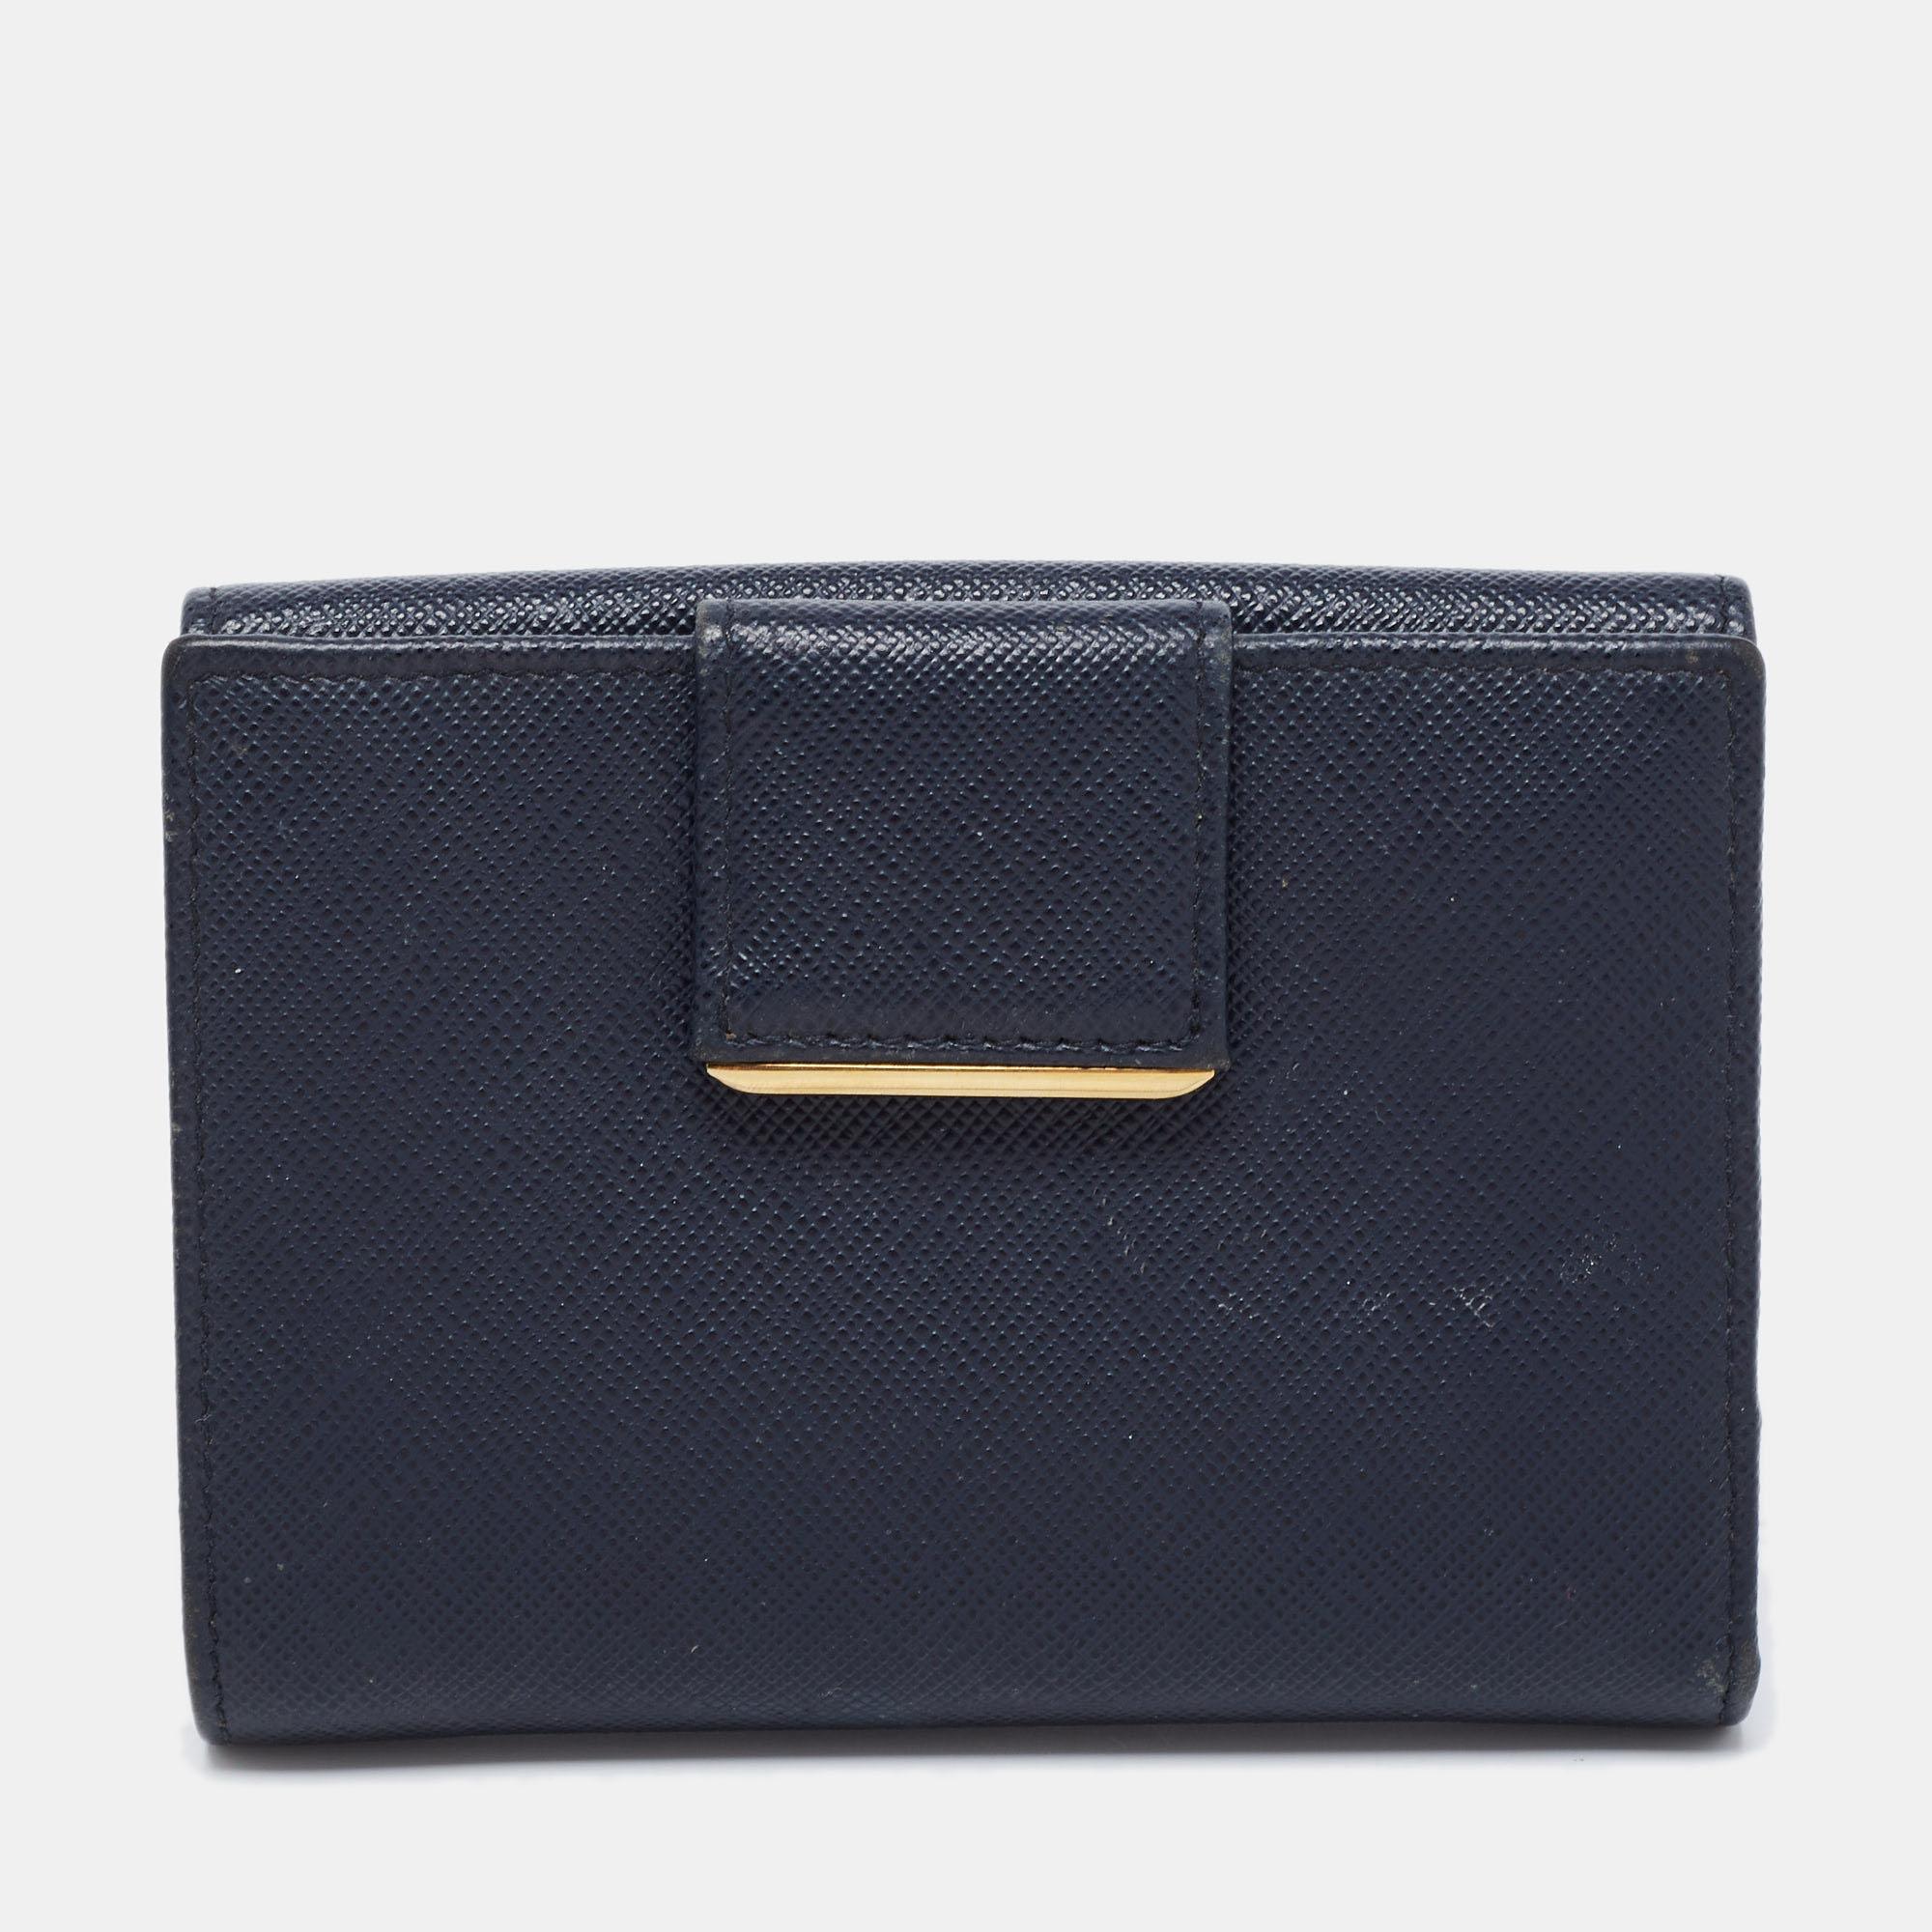 This Prada wallet is conveniently designed for everyday use. Crafted from Saffiano metal leather, the piece comes in a flap style with a logo in gold tone. The wallet has a bifold compartment at the back with multiple slots.

Includes: Authenticity